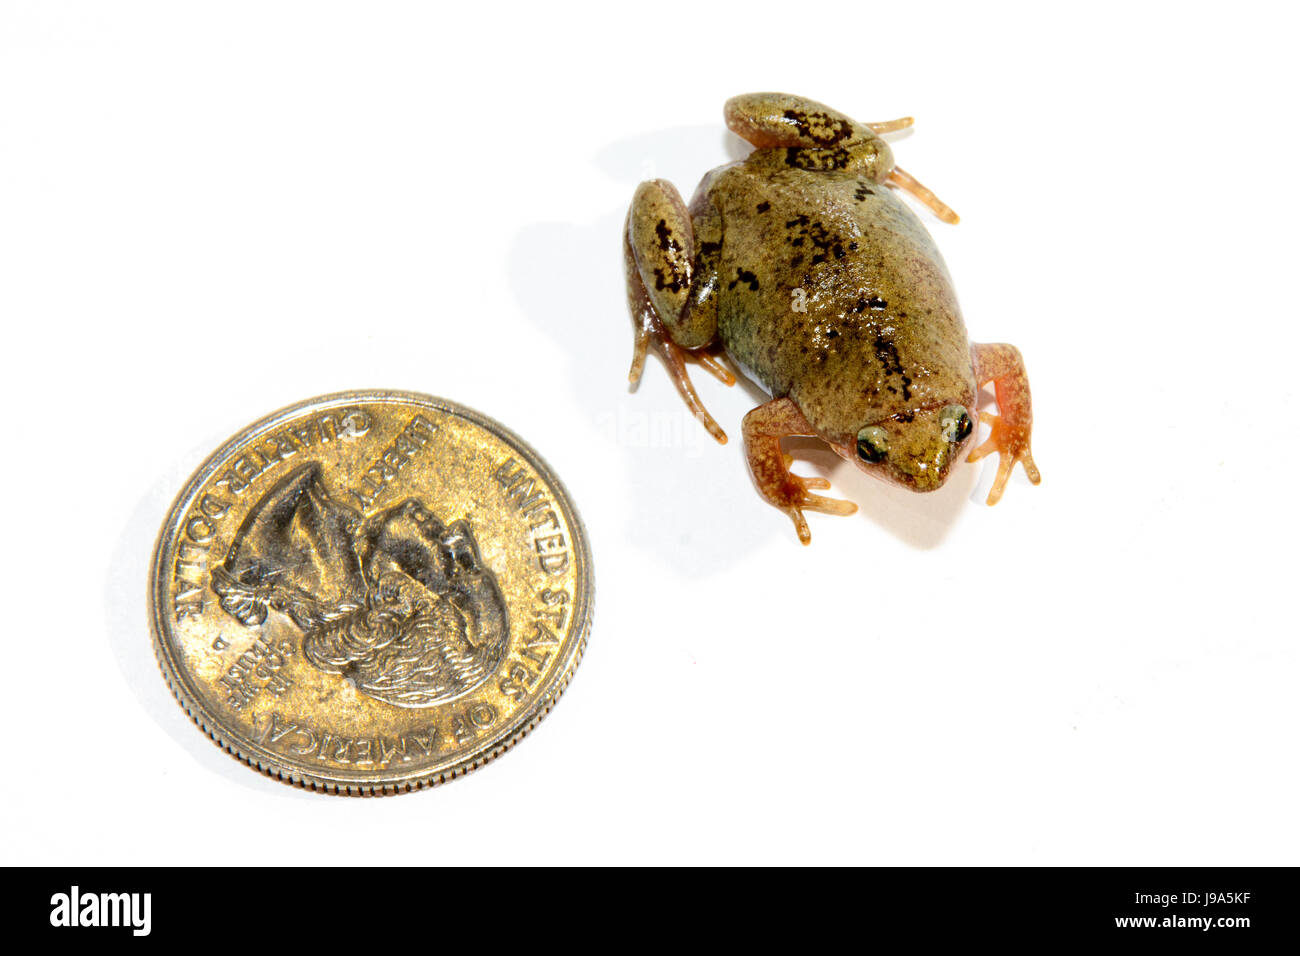 Adult Male Gastrophryne olivacea; Great Plains Narrow-mouth Toad on white background Stock Photo